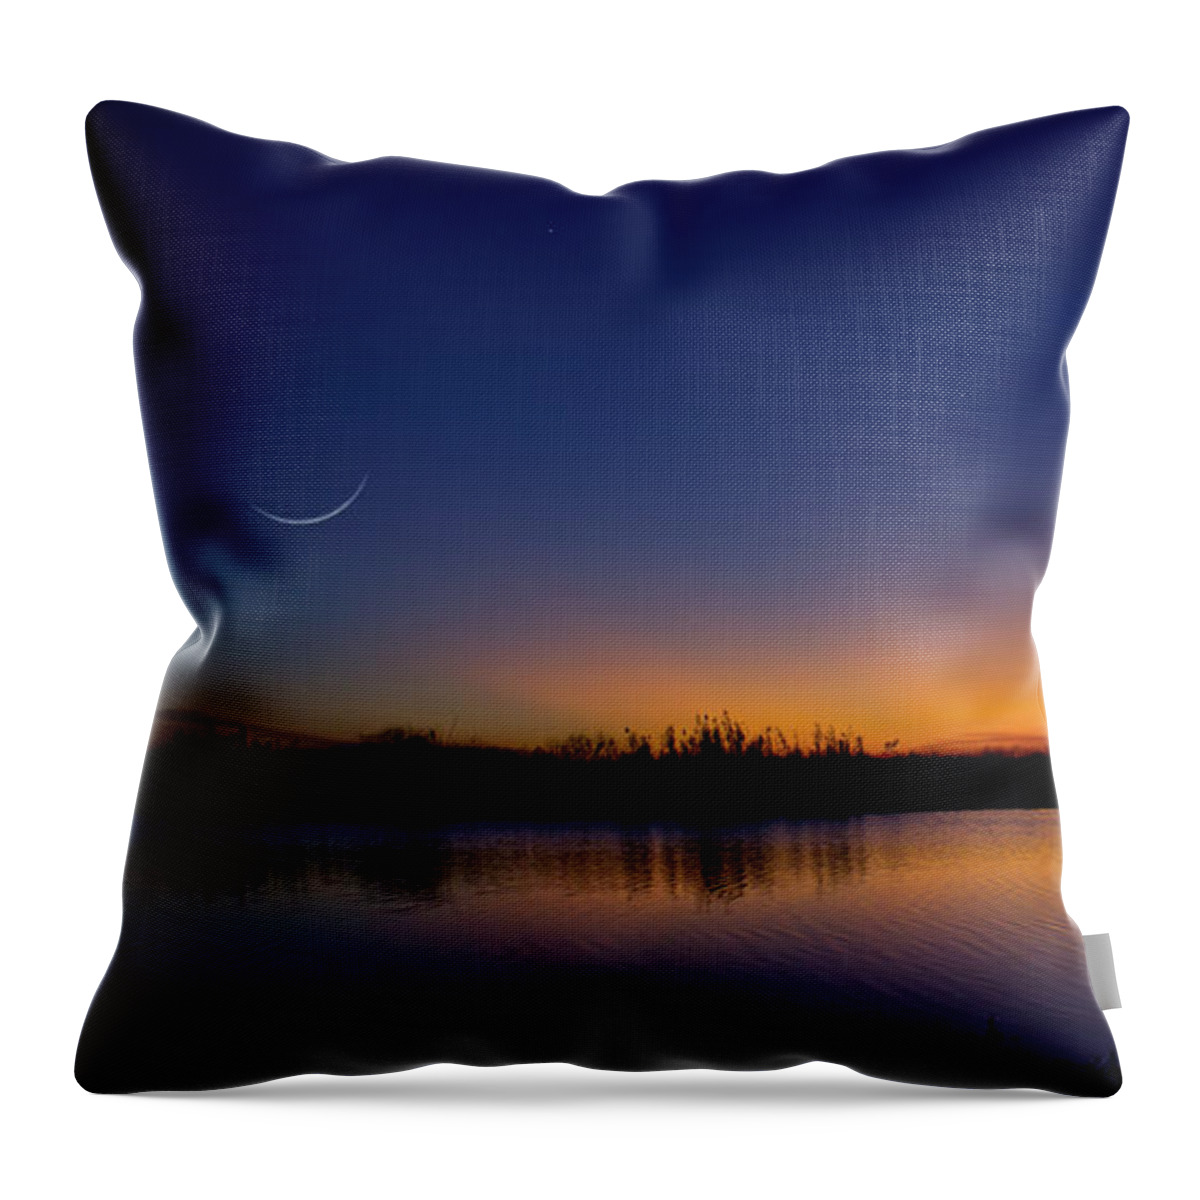 Everglades Throw Pillow featuring the photograph Everglades Twilight by Mark Andrew Thomas